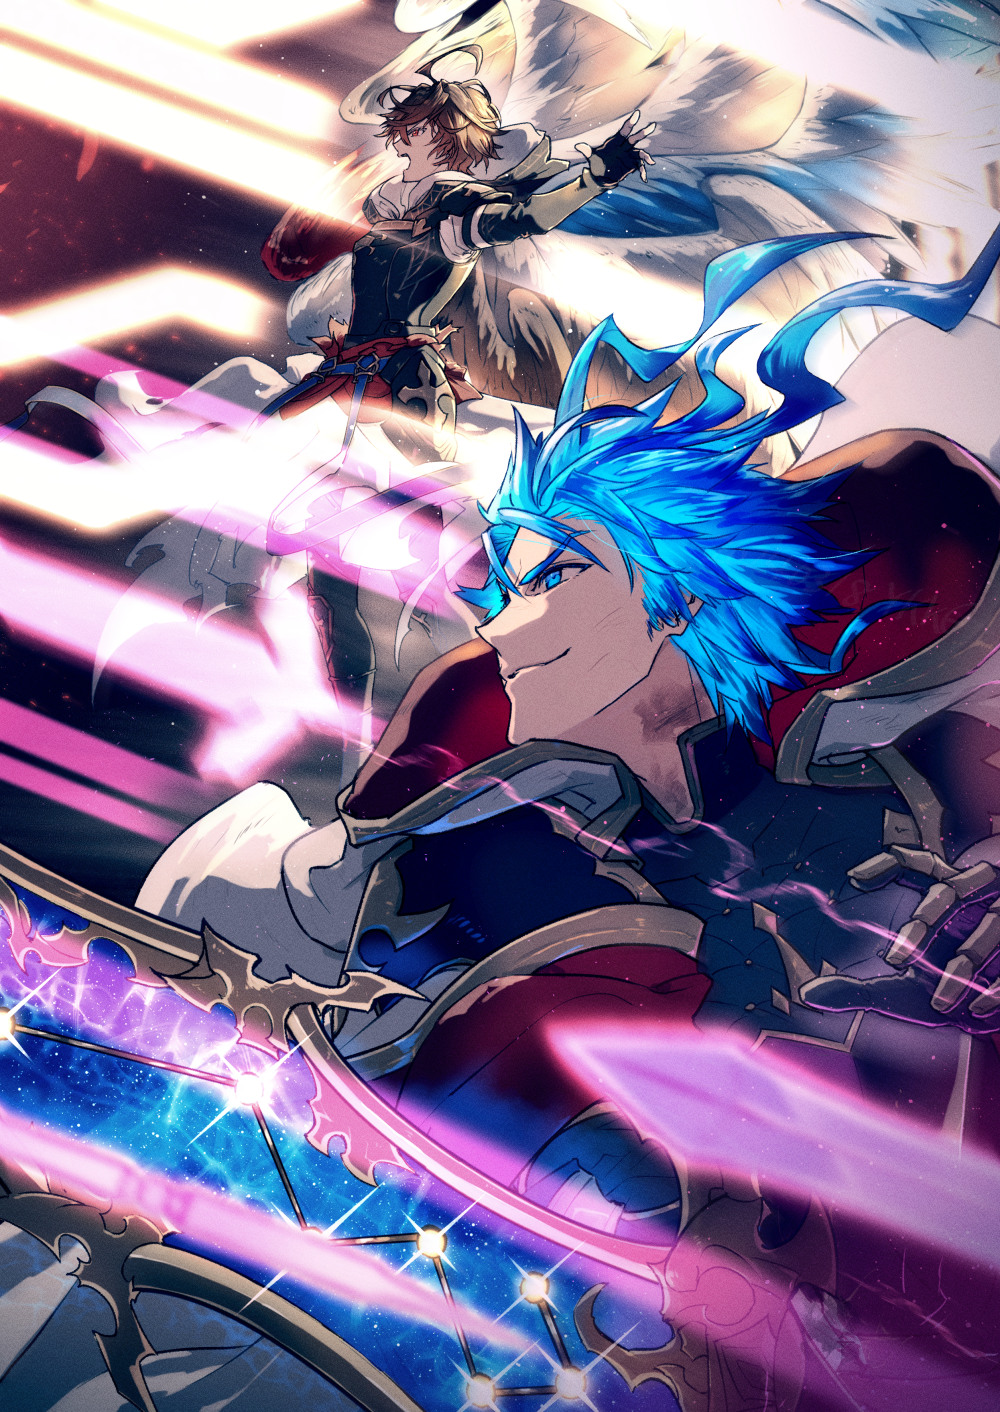 2boys ahoge alternate_hair_color armor bishounen blue_eyes blue_hair blue_wings breastplate brown_hair bruise cape commentary commentary_request fighting fingerless_gloves from_side furrowed_brow gauntlets gloves granblue_fantasy hair_between_eyes highres hood hood_down injury jacket light male_focus messy_hair multiple_boys outstretched_arms parted_bangs red_eyes red_wings sandalphon_(granblue_fantasy) seofon_(granblue_fantasy) short_hair smile spiky_hair spoilers star_(sky) turtleneck waldtrad white_cape white_jacket white_wings wings